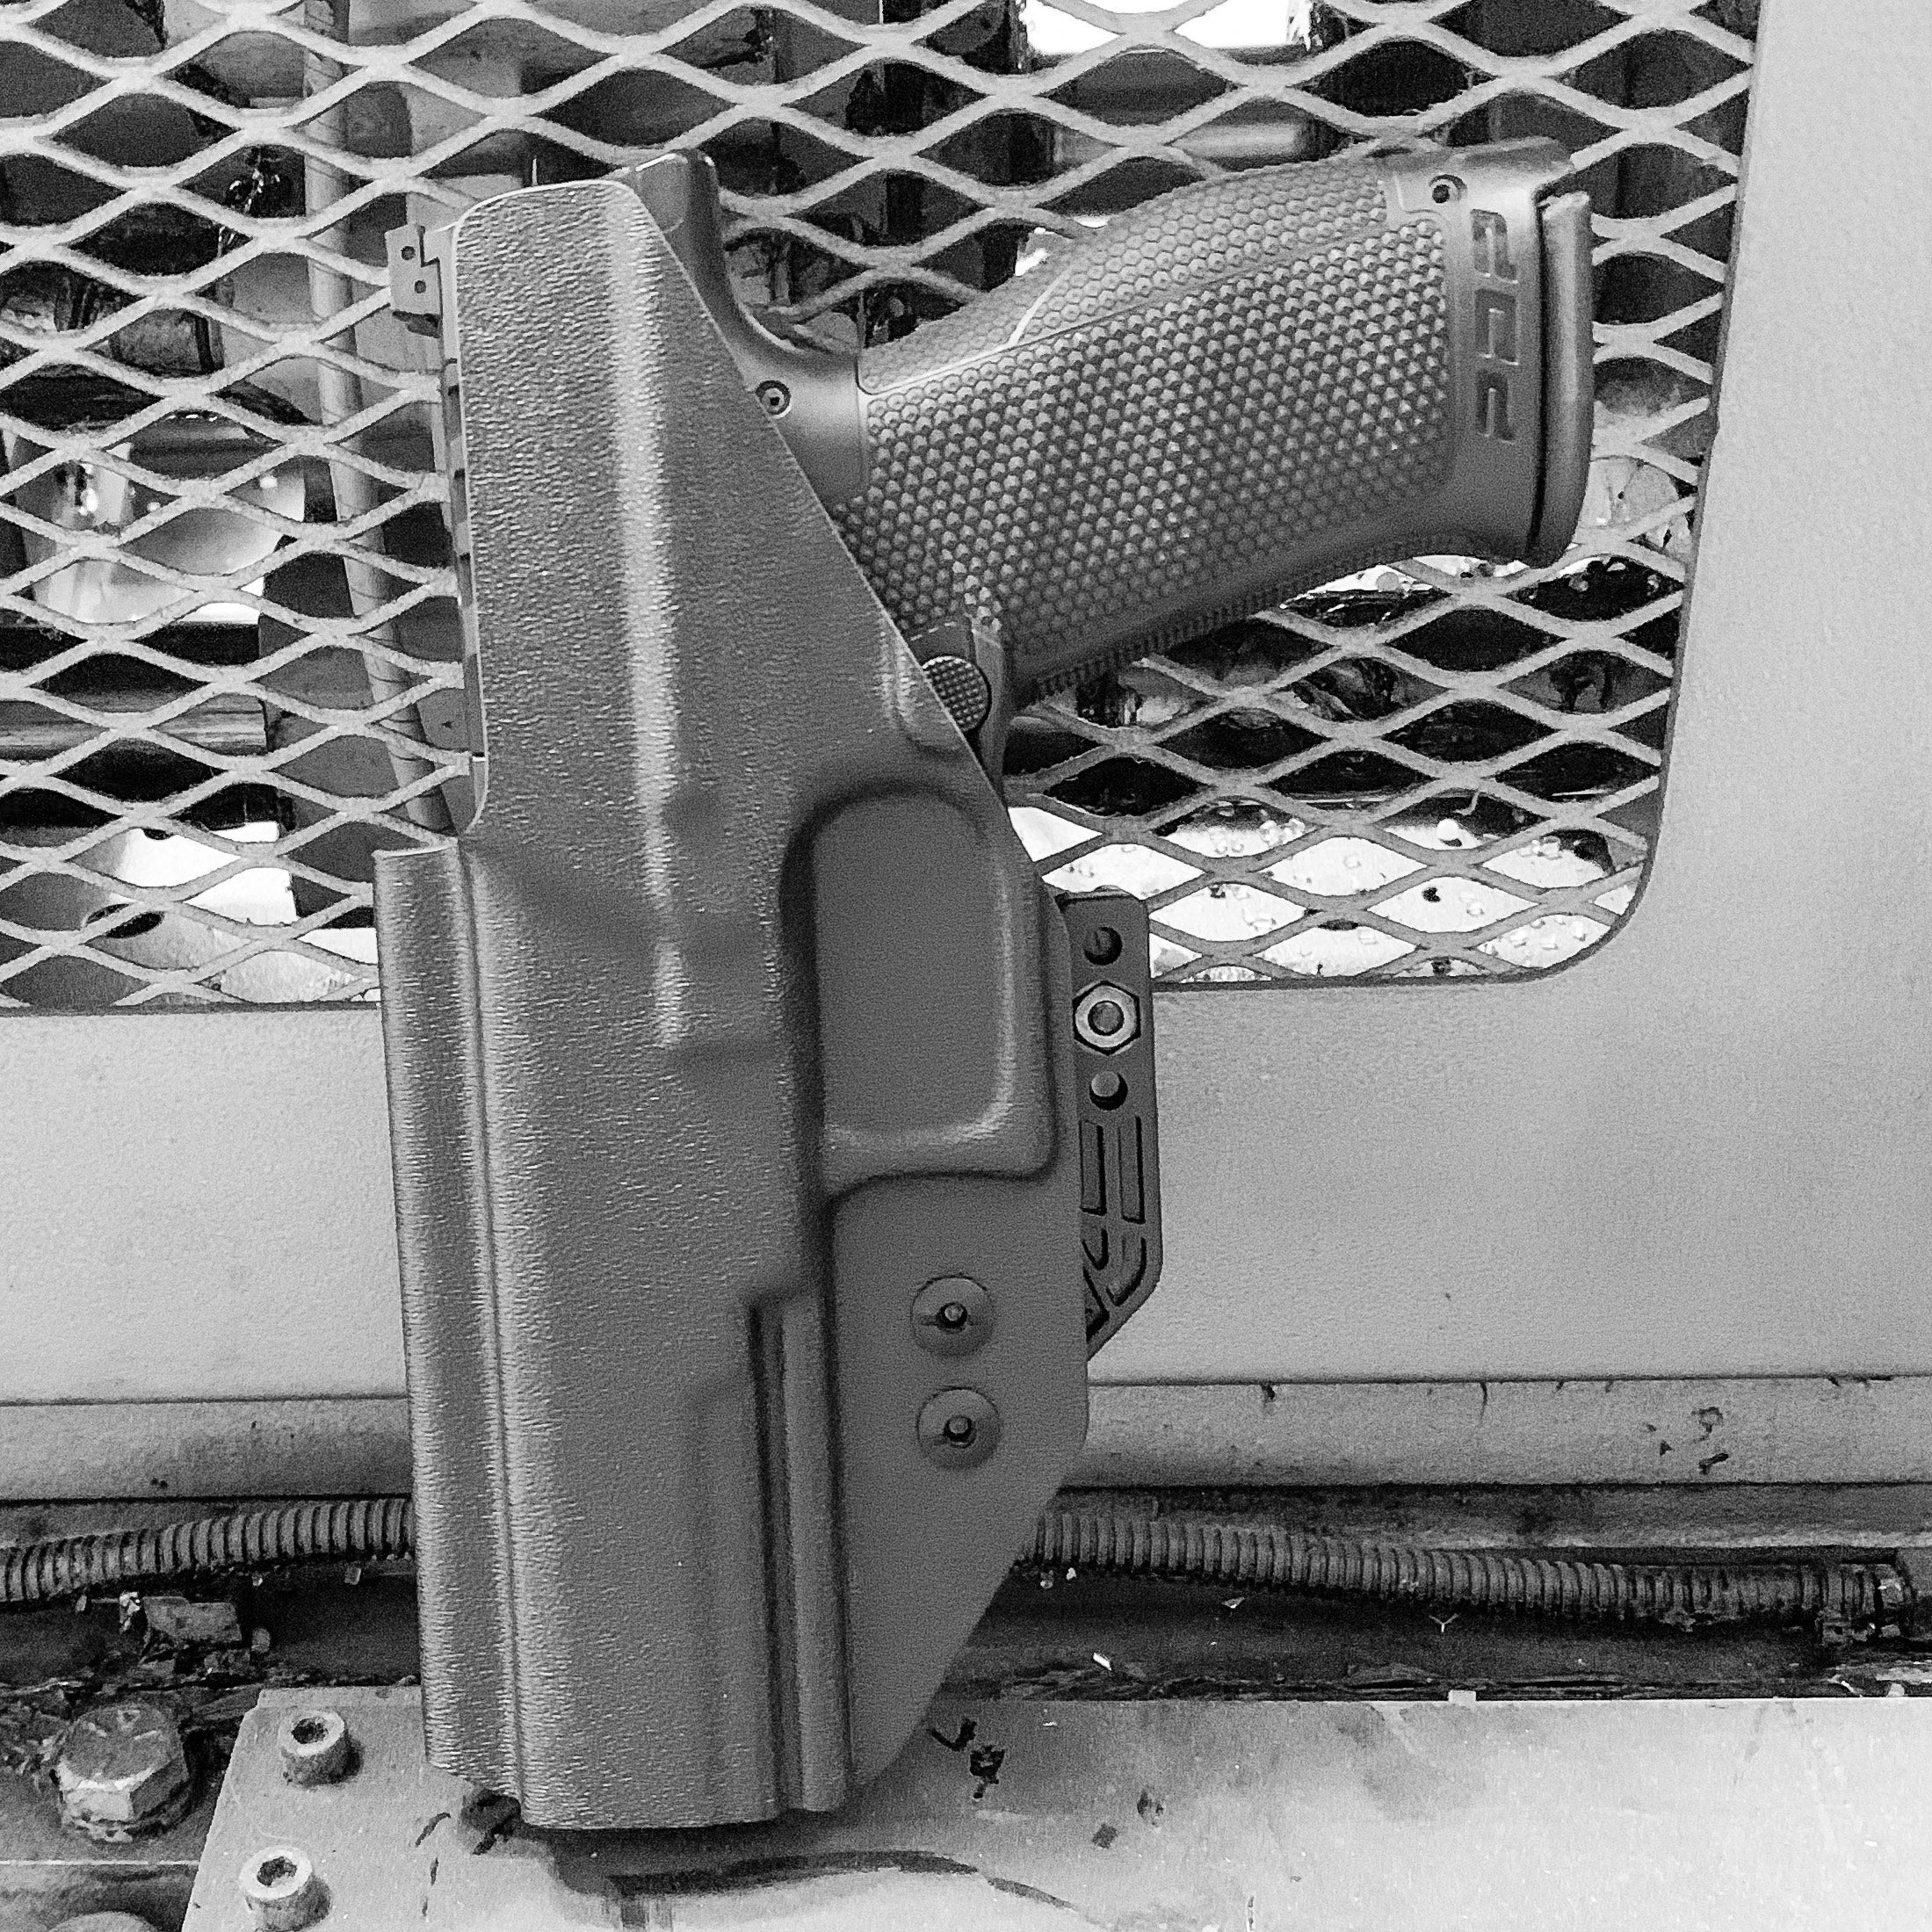 For the best concealed carry Inside Waistband IWB AIWB Holster designed to fit the Walther PDP Pro SD 4.6" pistol  shop Four Brothers Holsters. Profile is cut to allow red dot sights to be mounted on the pistol. Full sweat guard, adjustable retention and open muzzle for threaded barrels and compensators. PDP, Pro SD